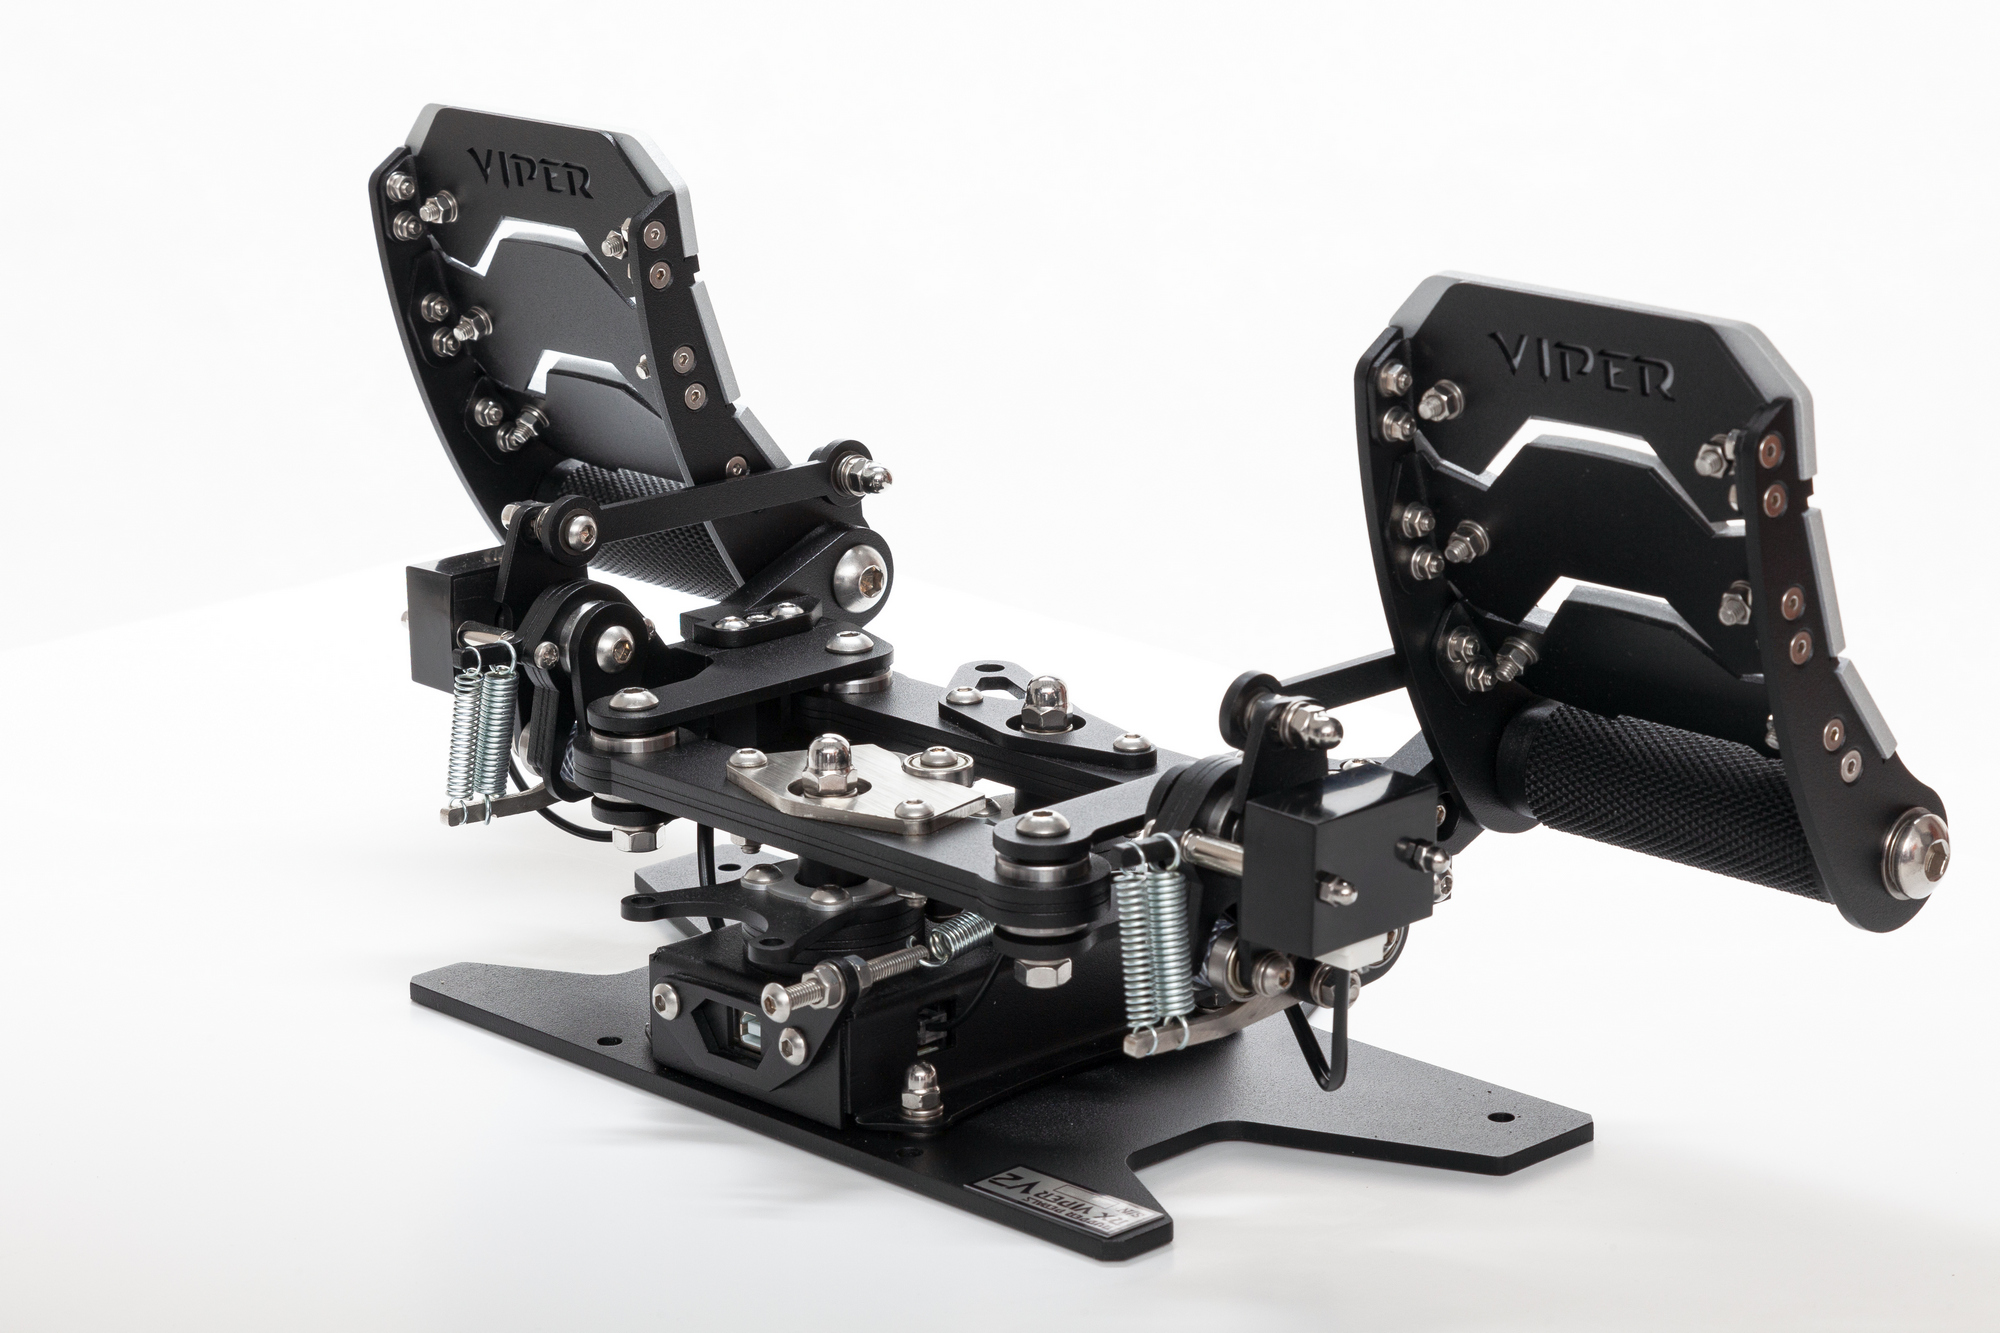 Slaw Device RX Viper V2 Rudder Pedals - PC Hardware and Related Software -  ED Forums